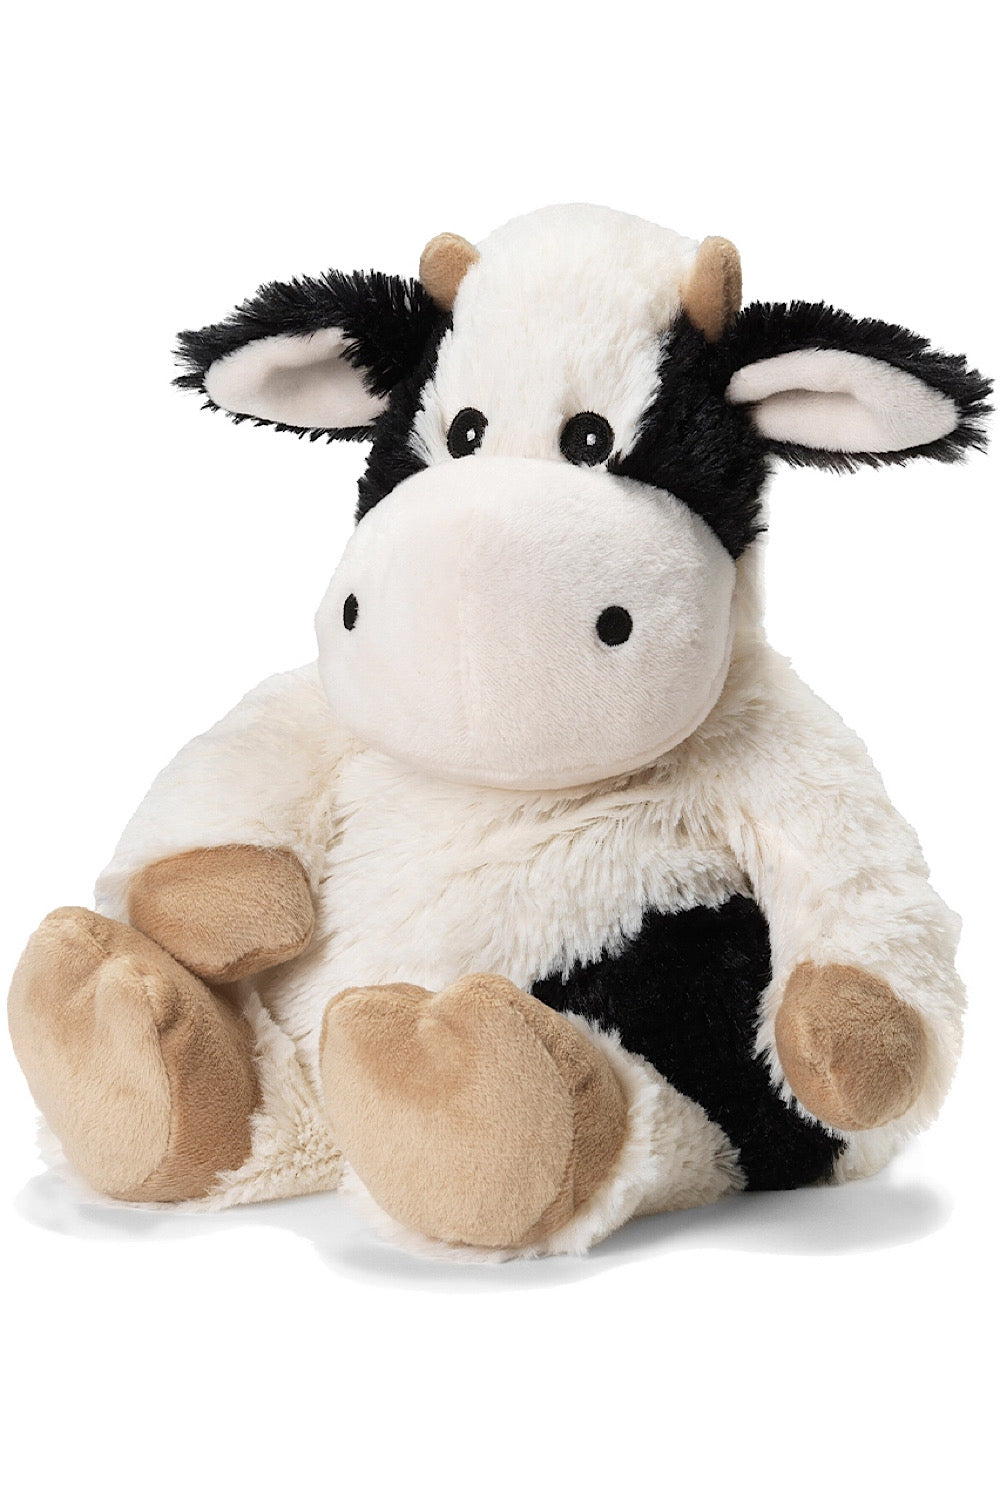 BLACK AND WHITE COW WARMIES